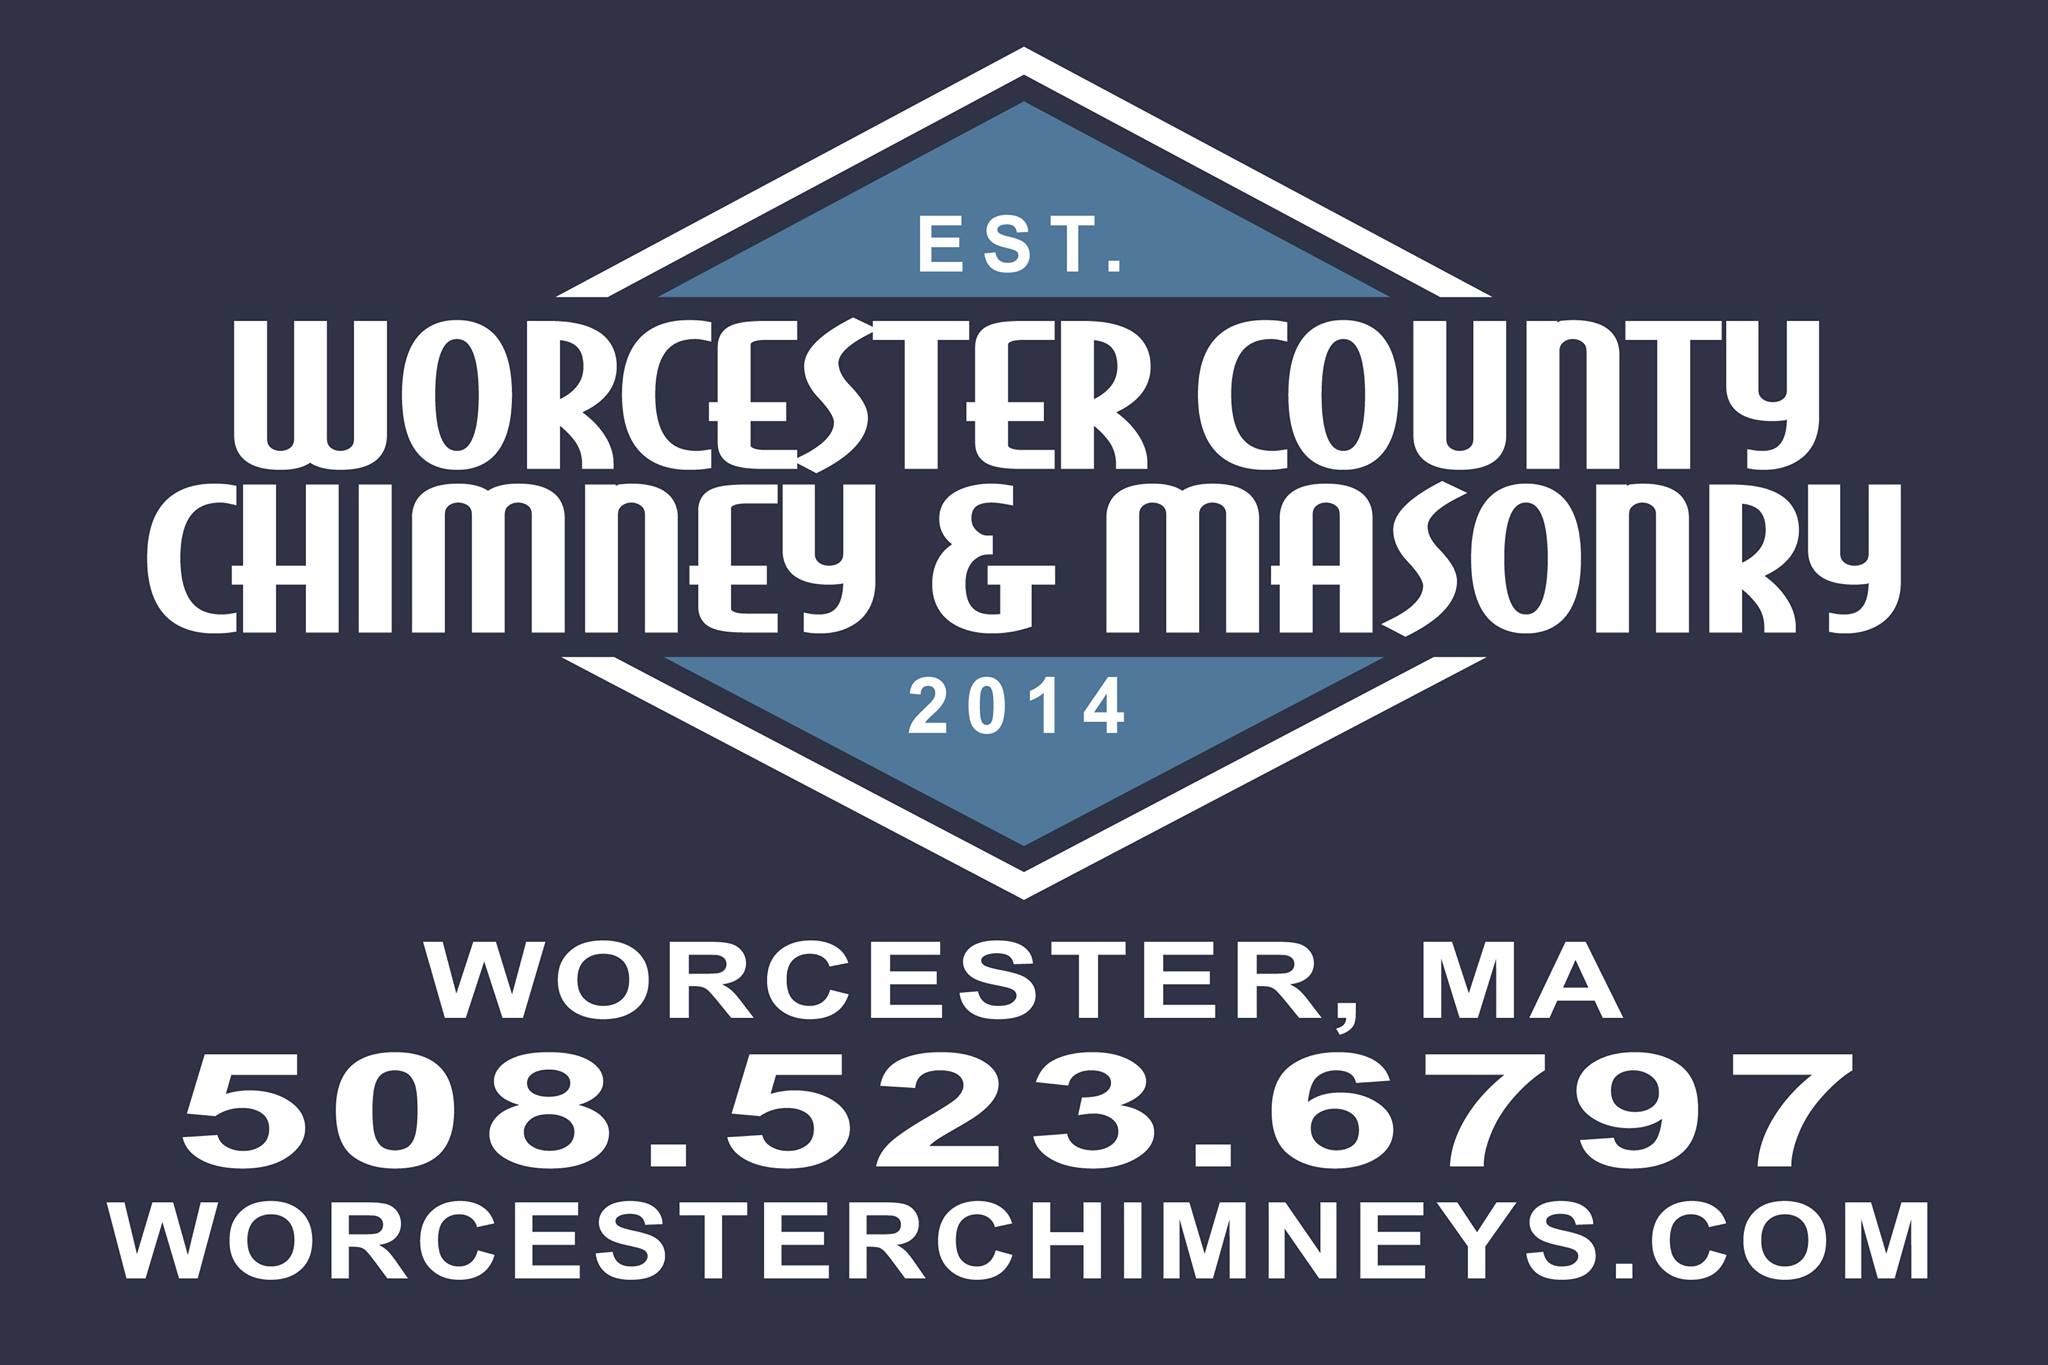 Worcester County Chimney & Masonry 1065 Main St, Leicester Massachusetts 01524